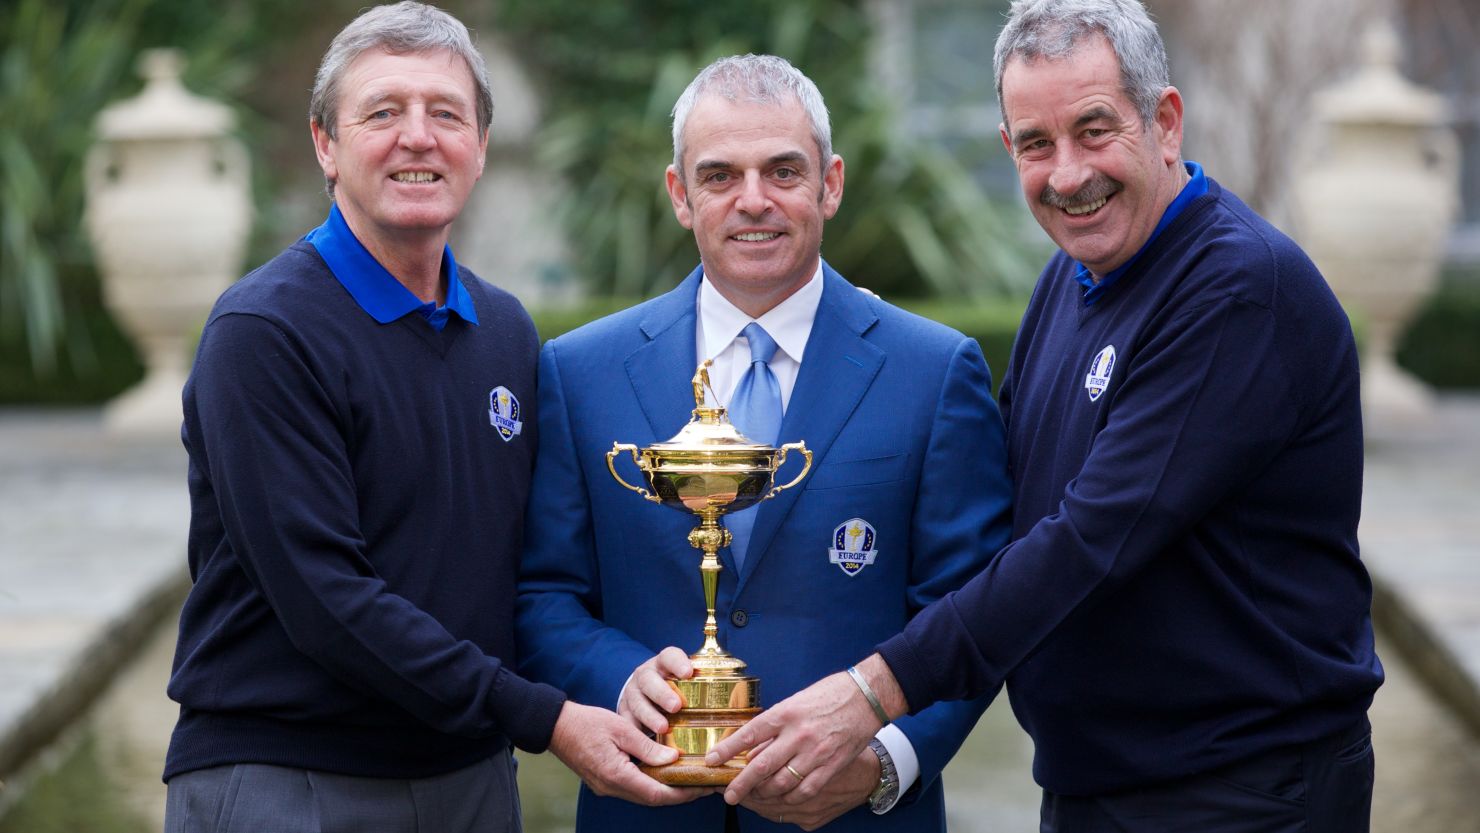 European captain McGinley has named two close friends -- Des Smyth (l) and Sam Torrance (r) -- as his first vice captains. 